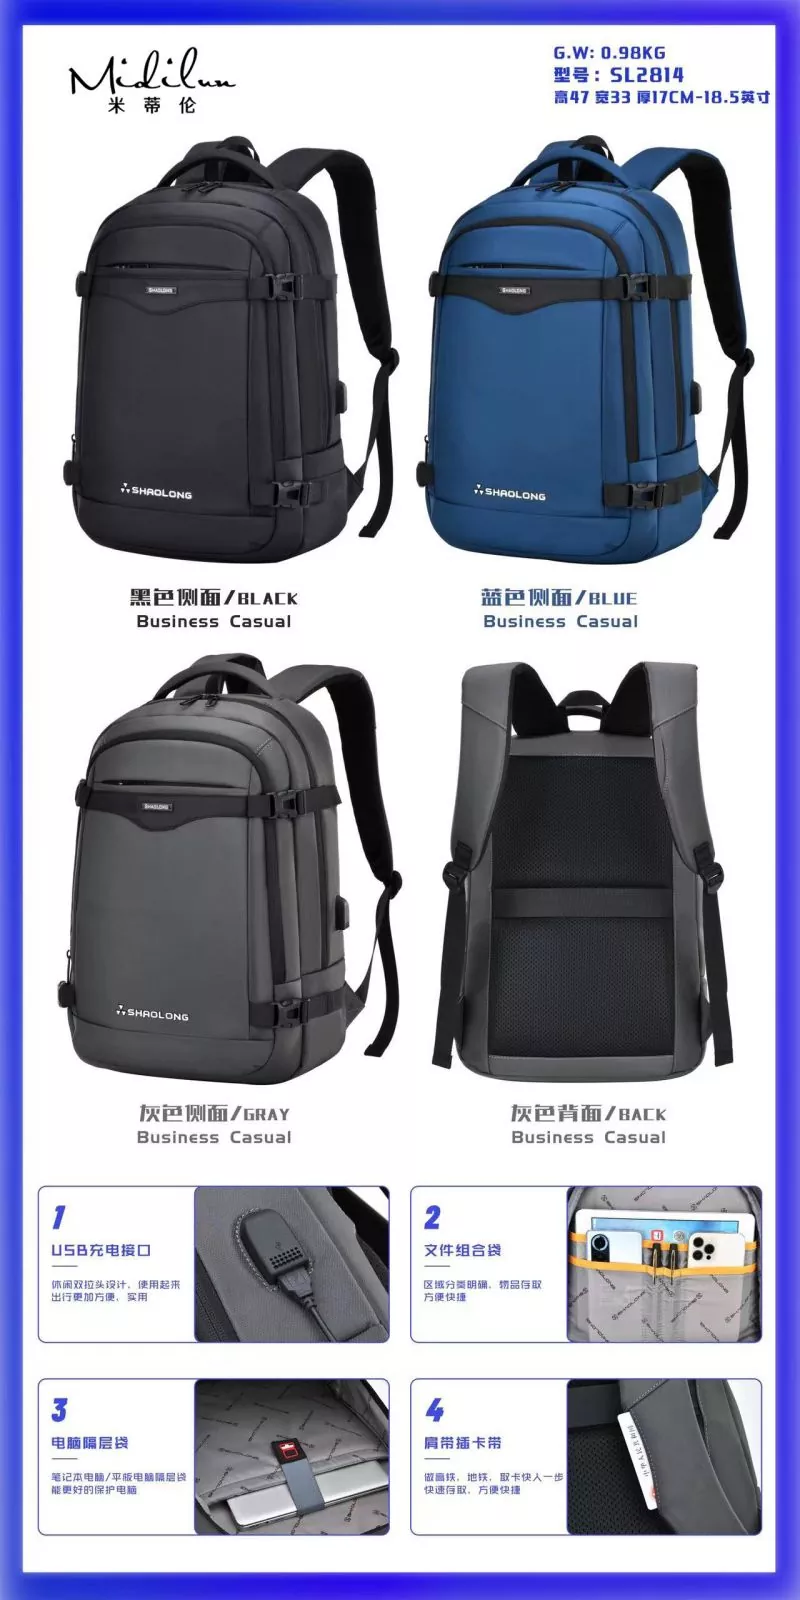 Laptop Bags for Business